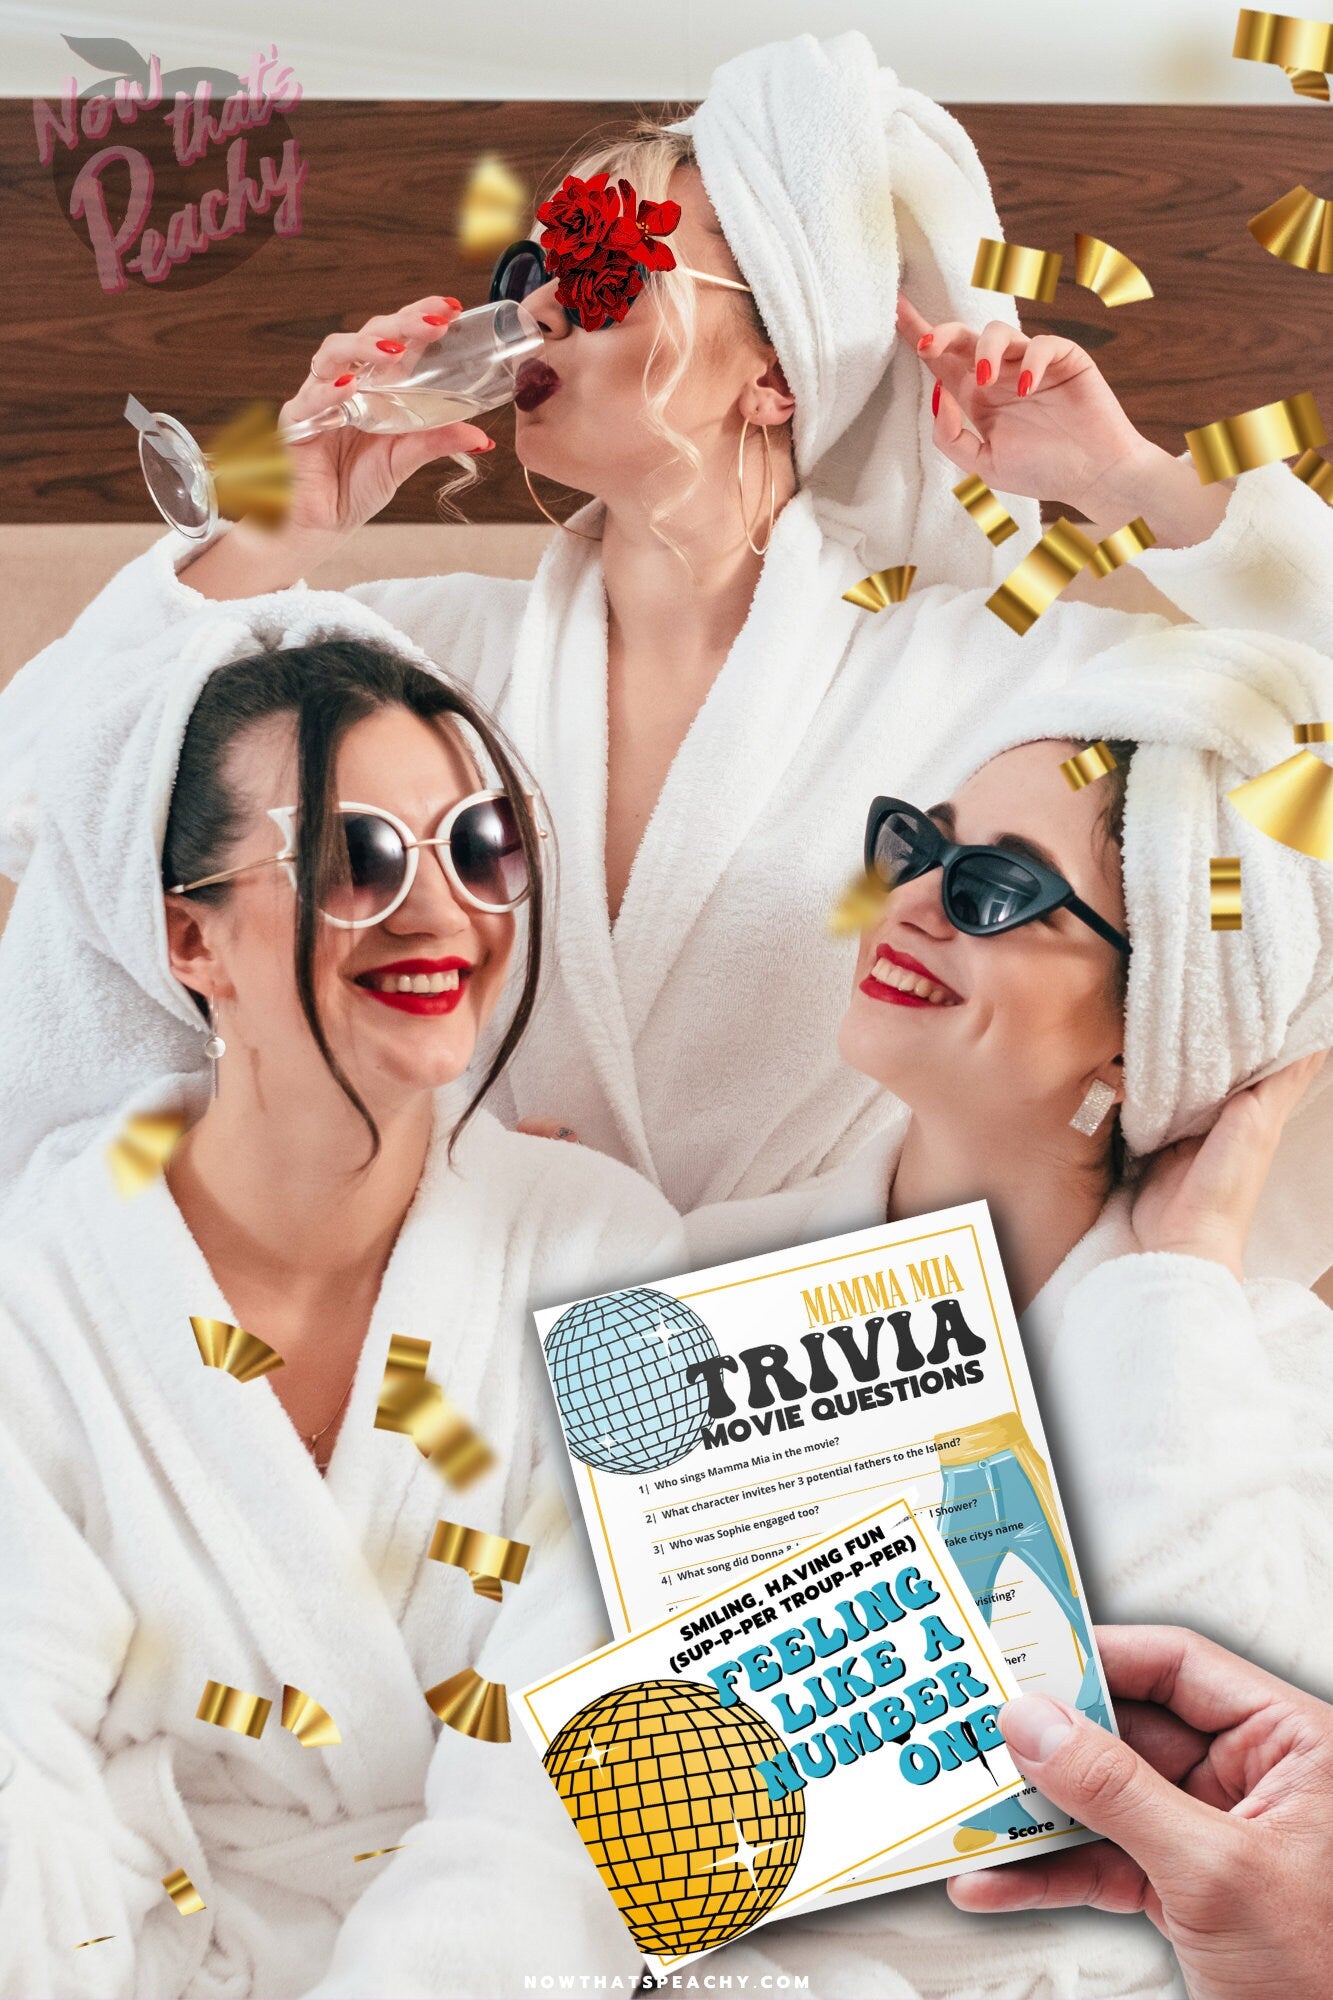 Mamma Mia trivia quiz question game 1970s flared denim pants seventies 70's disco ball karaoke  printable template digital instant download edit Donna and the dynamos invite edit custom musical movie design black white modern color fun themed bachelorette birthday charity event activity